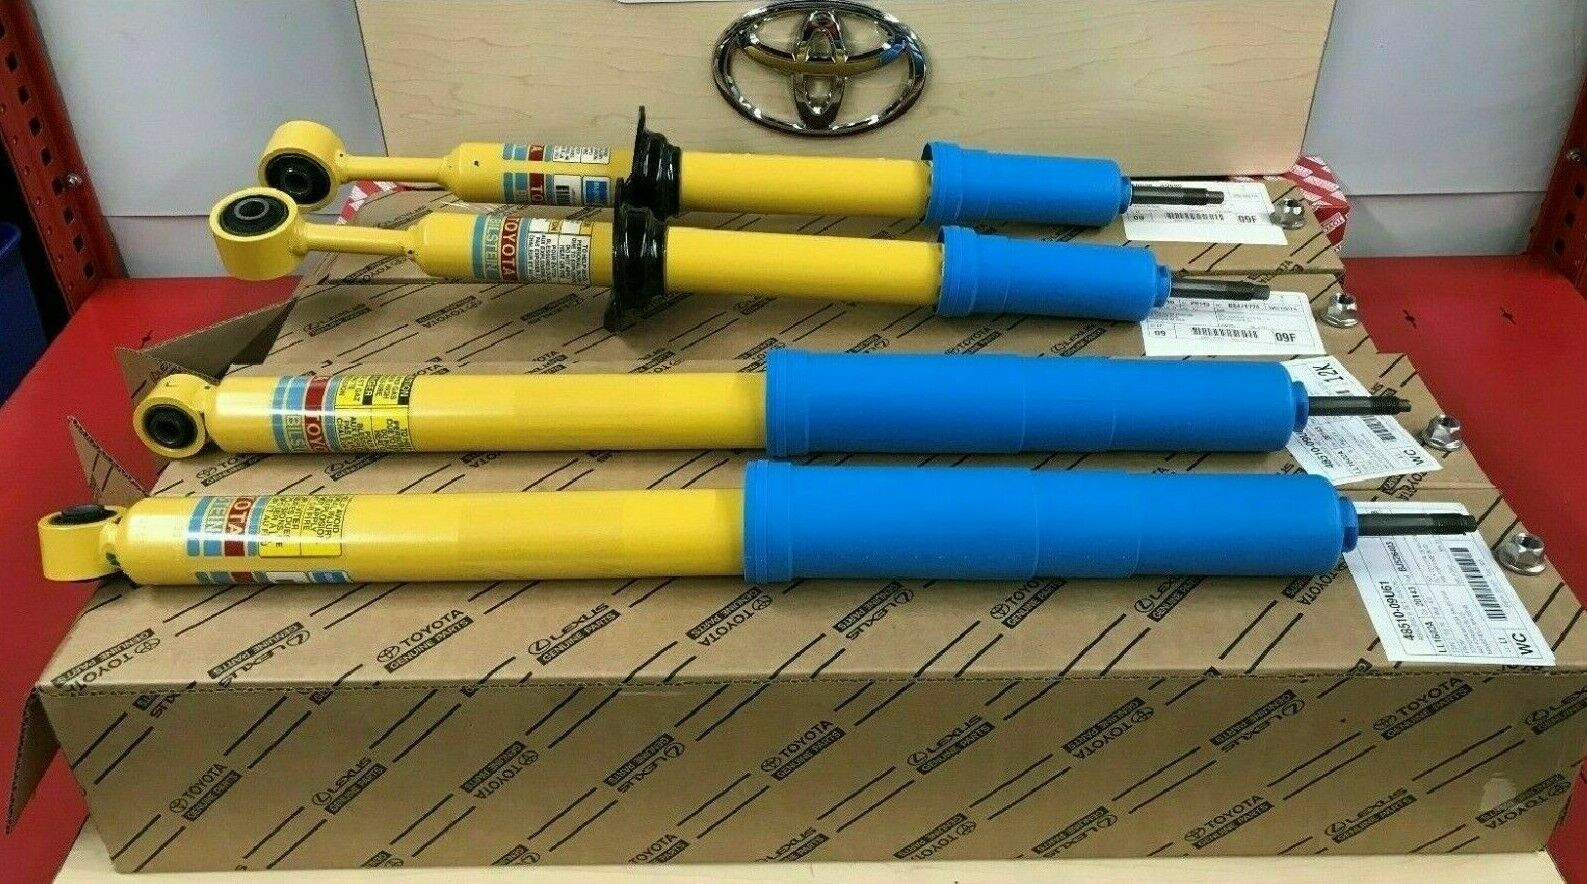 TOYOTA TACOMA 2005-2015 NEW GENUINE OEM FRONT AND REAR BILSTEIN SHOCKS SET OF 4